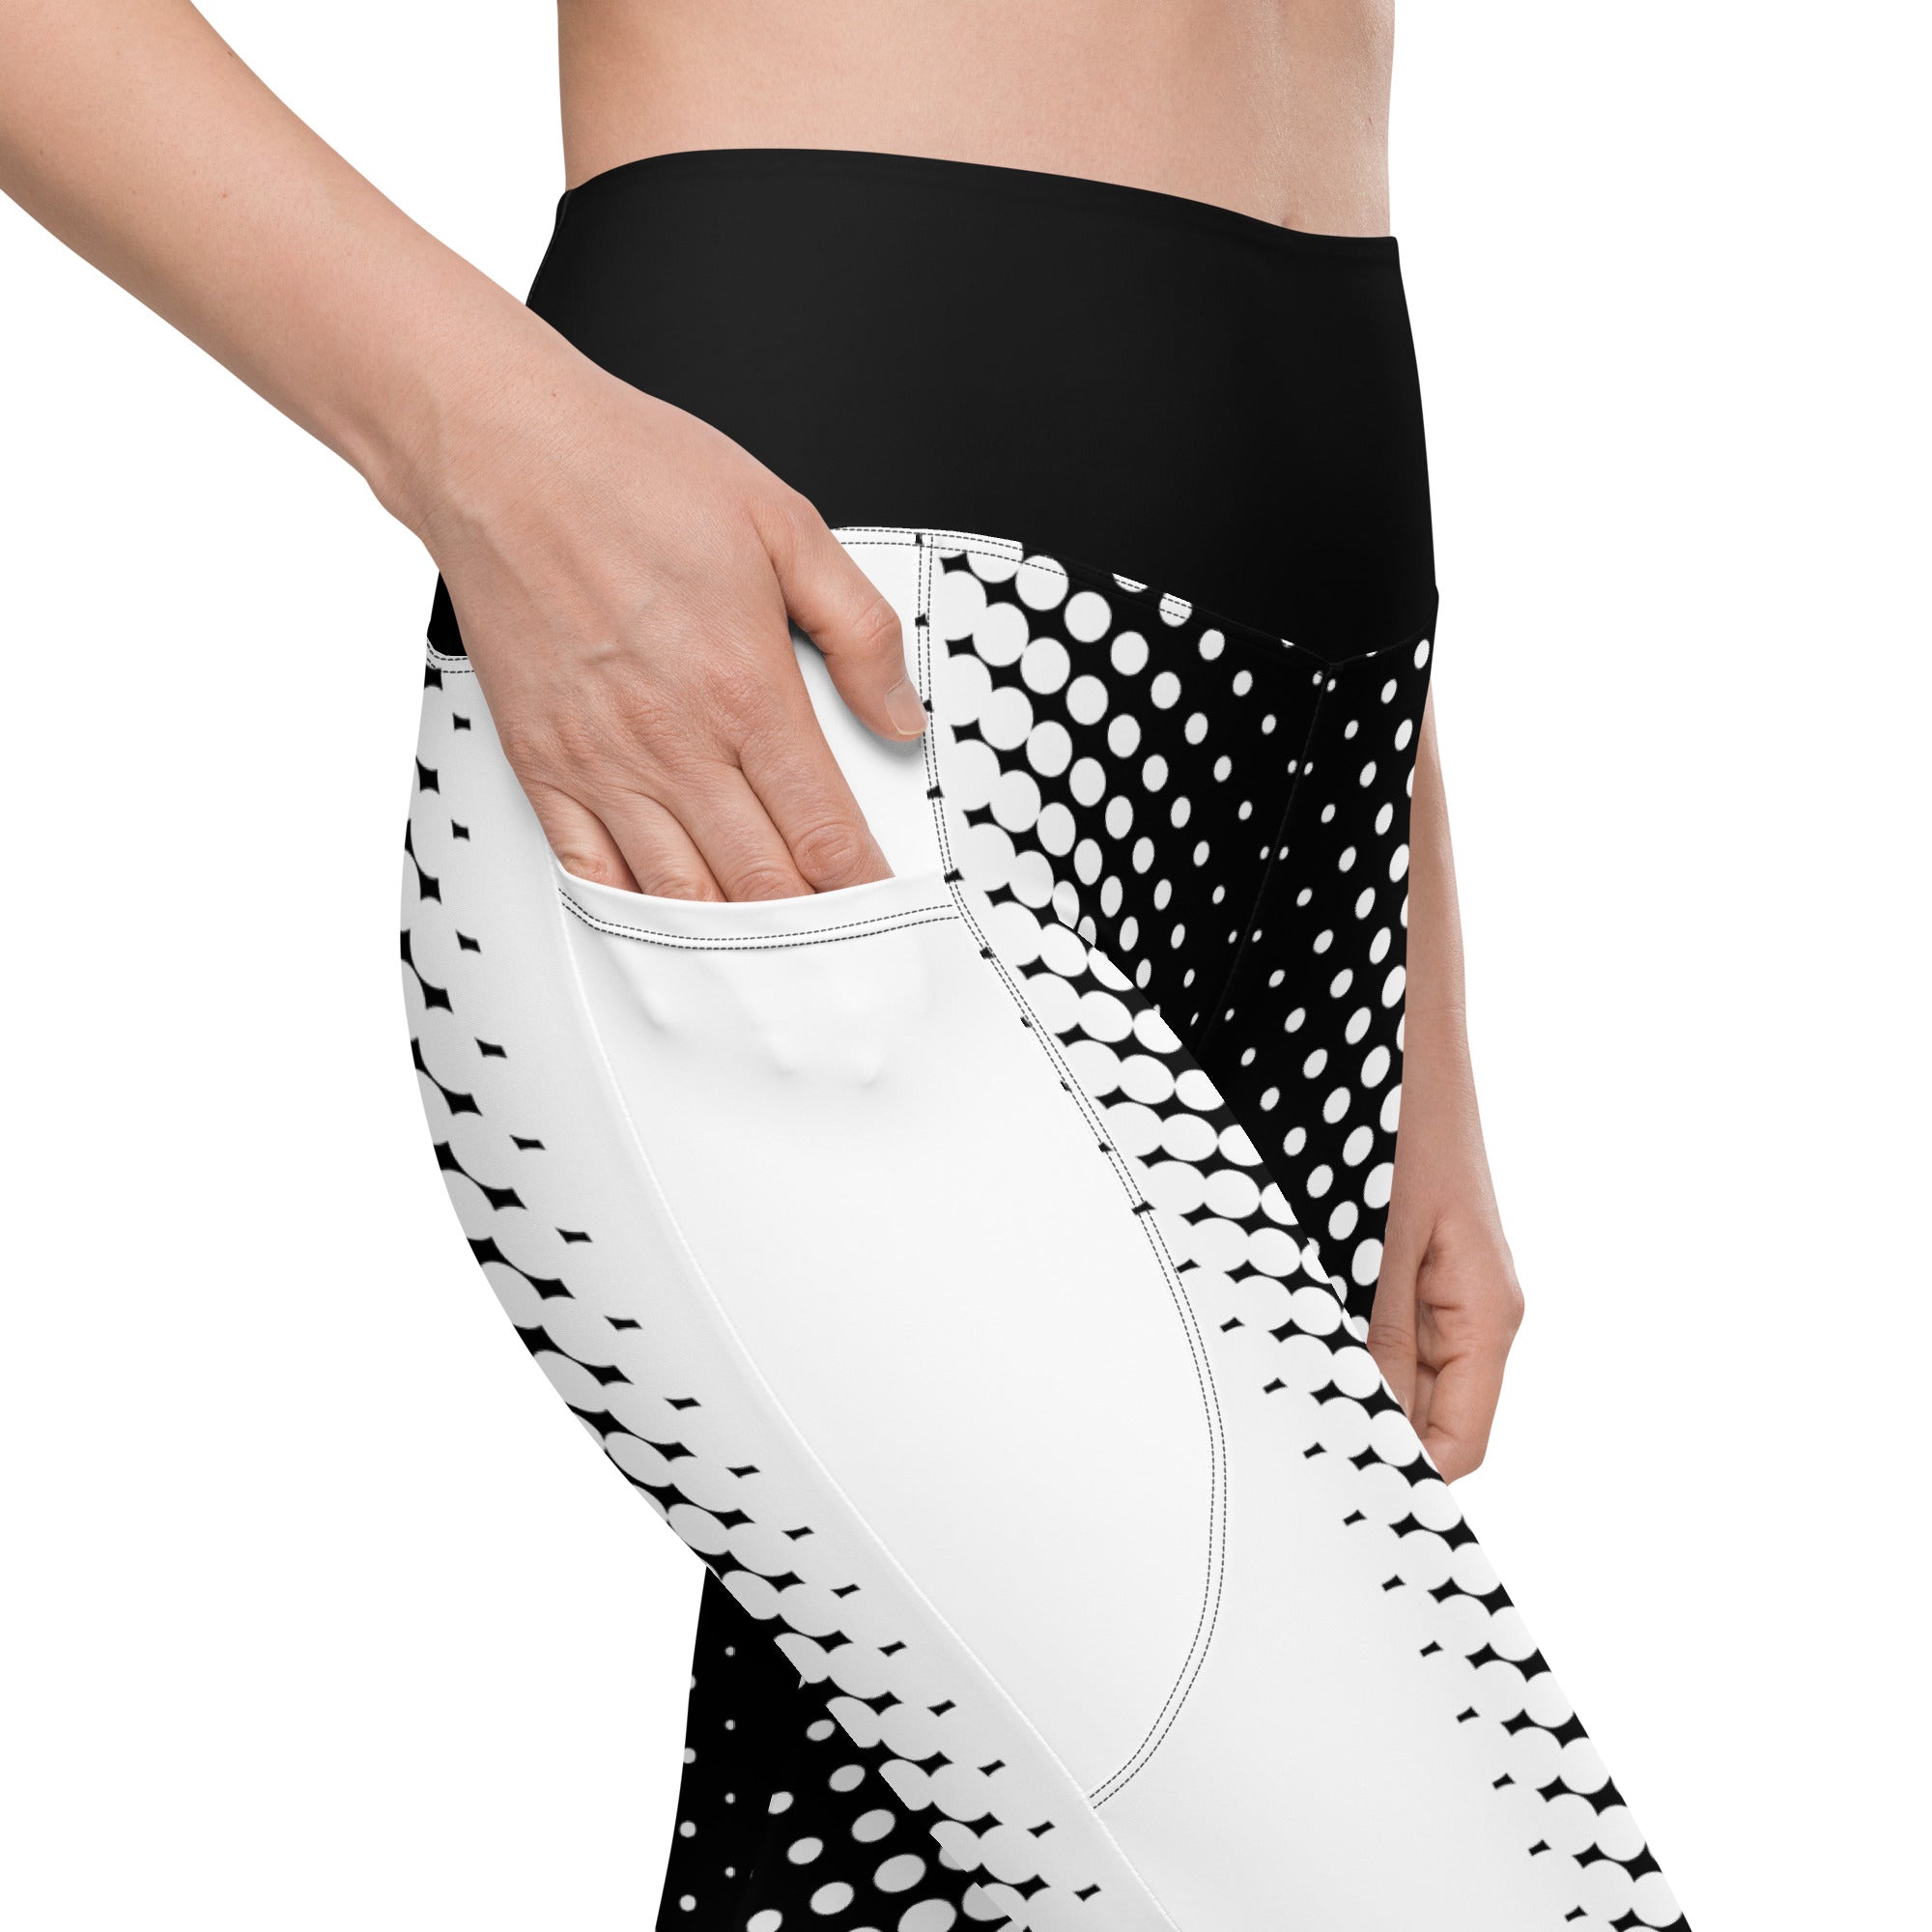 Optical Illusion Leggings With Pockets